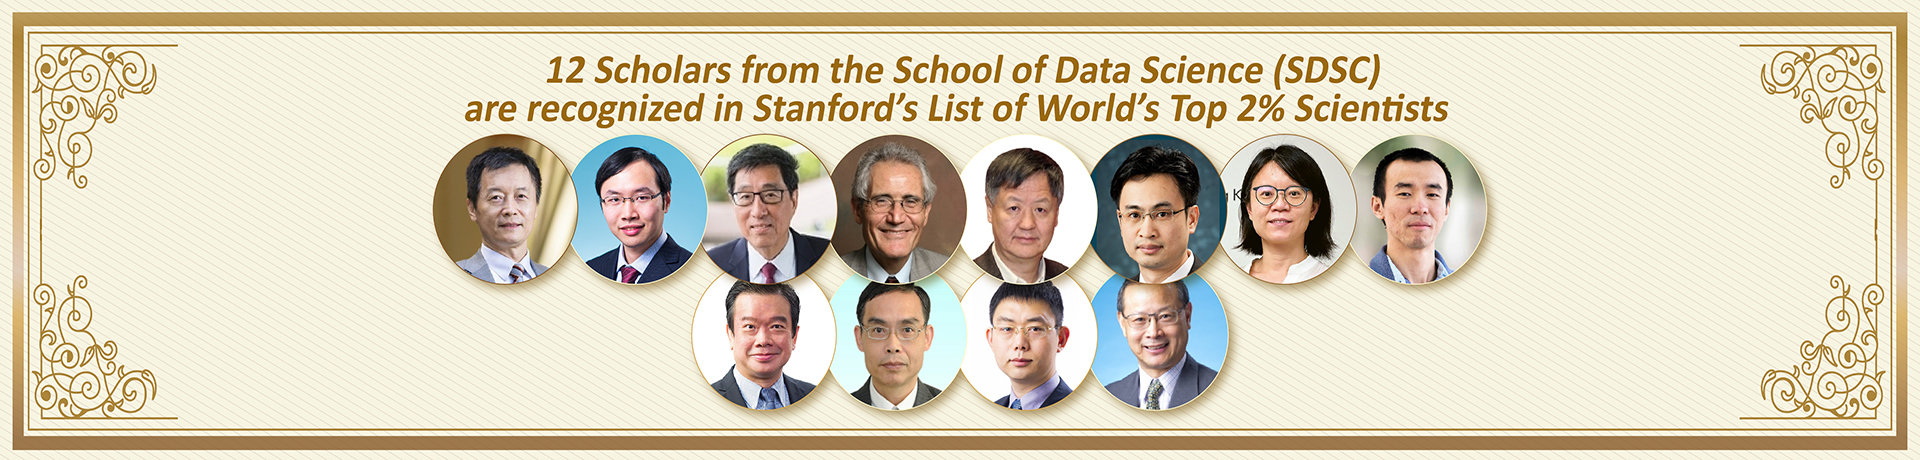 Twelve Scholars from the School of Data Science (SDSC) are recognized in Stanford’s List of World’s Top 2% Scientists